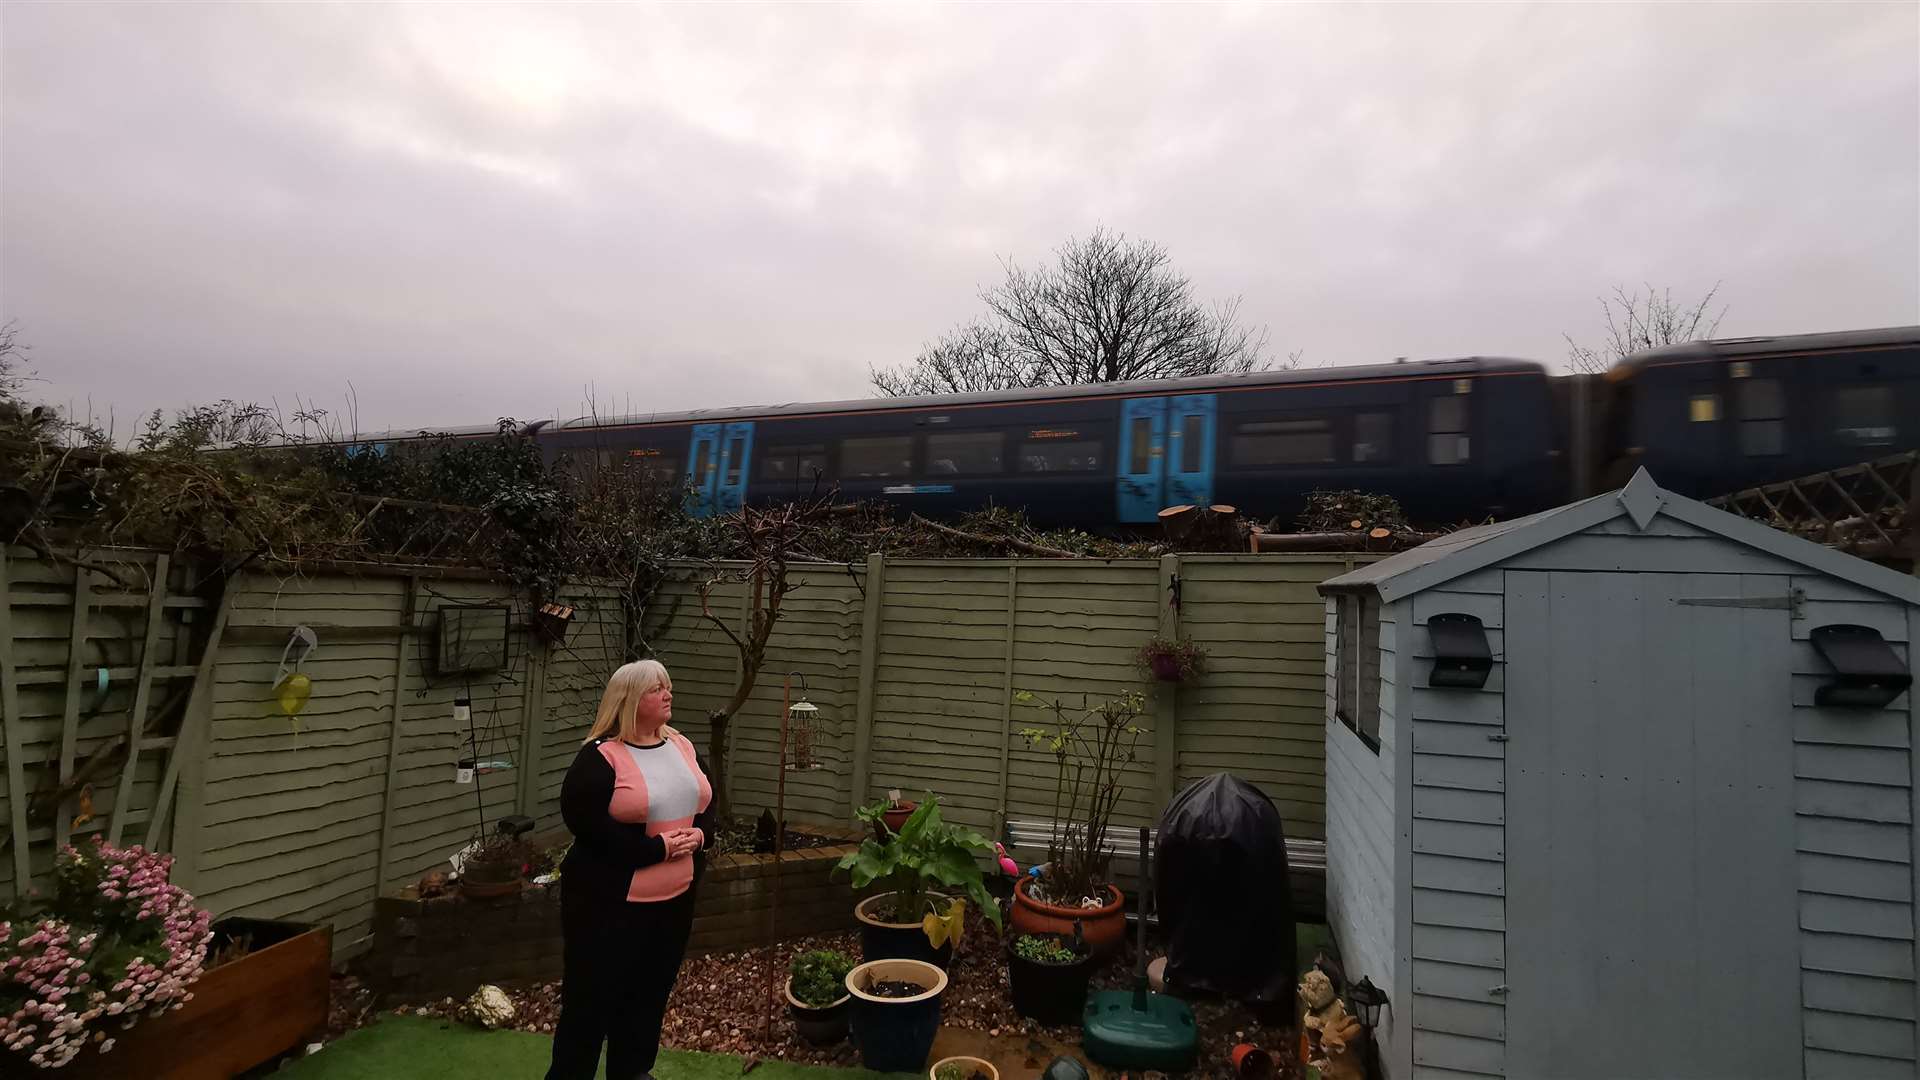 A train passing at the end of her garden